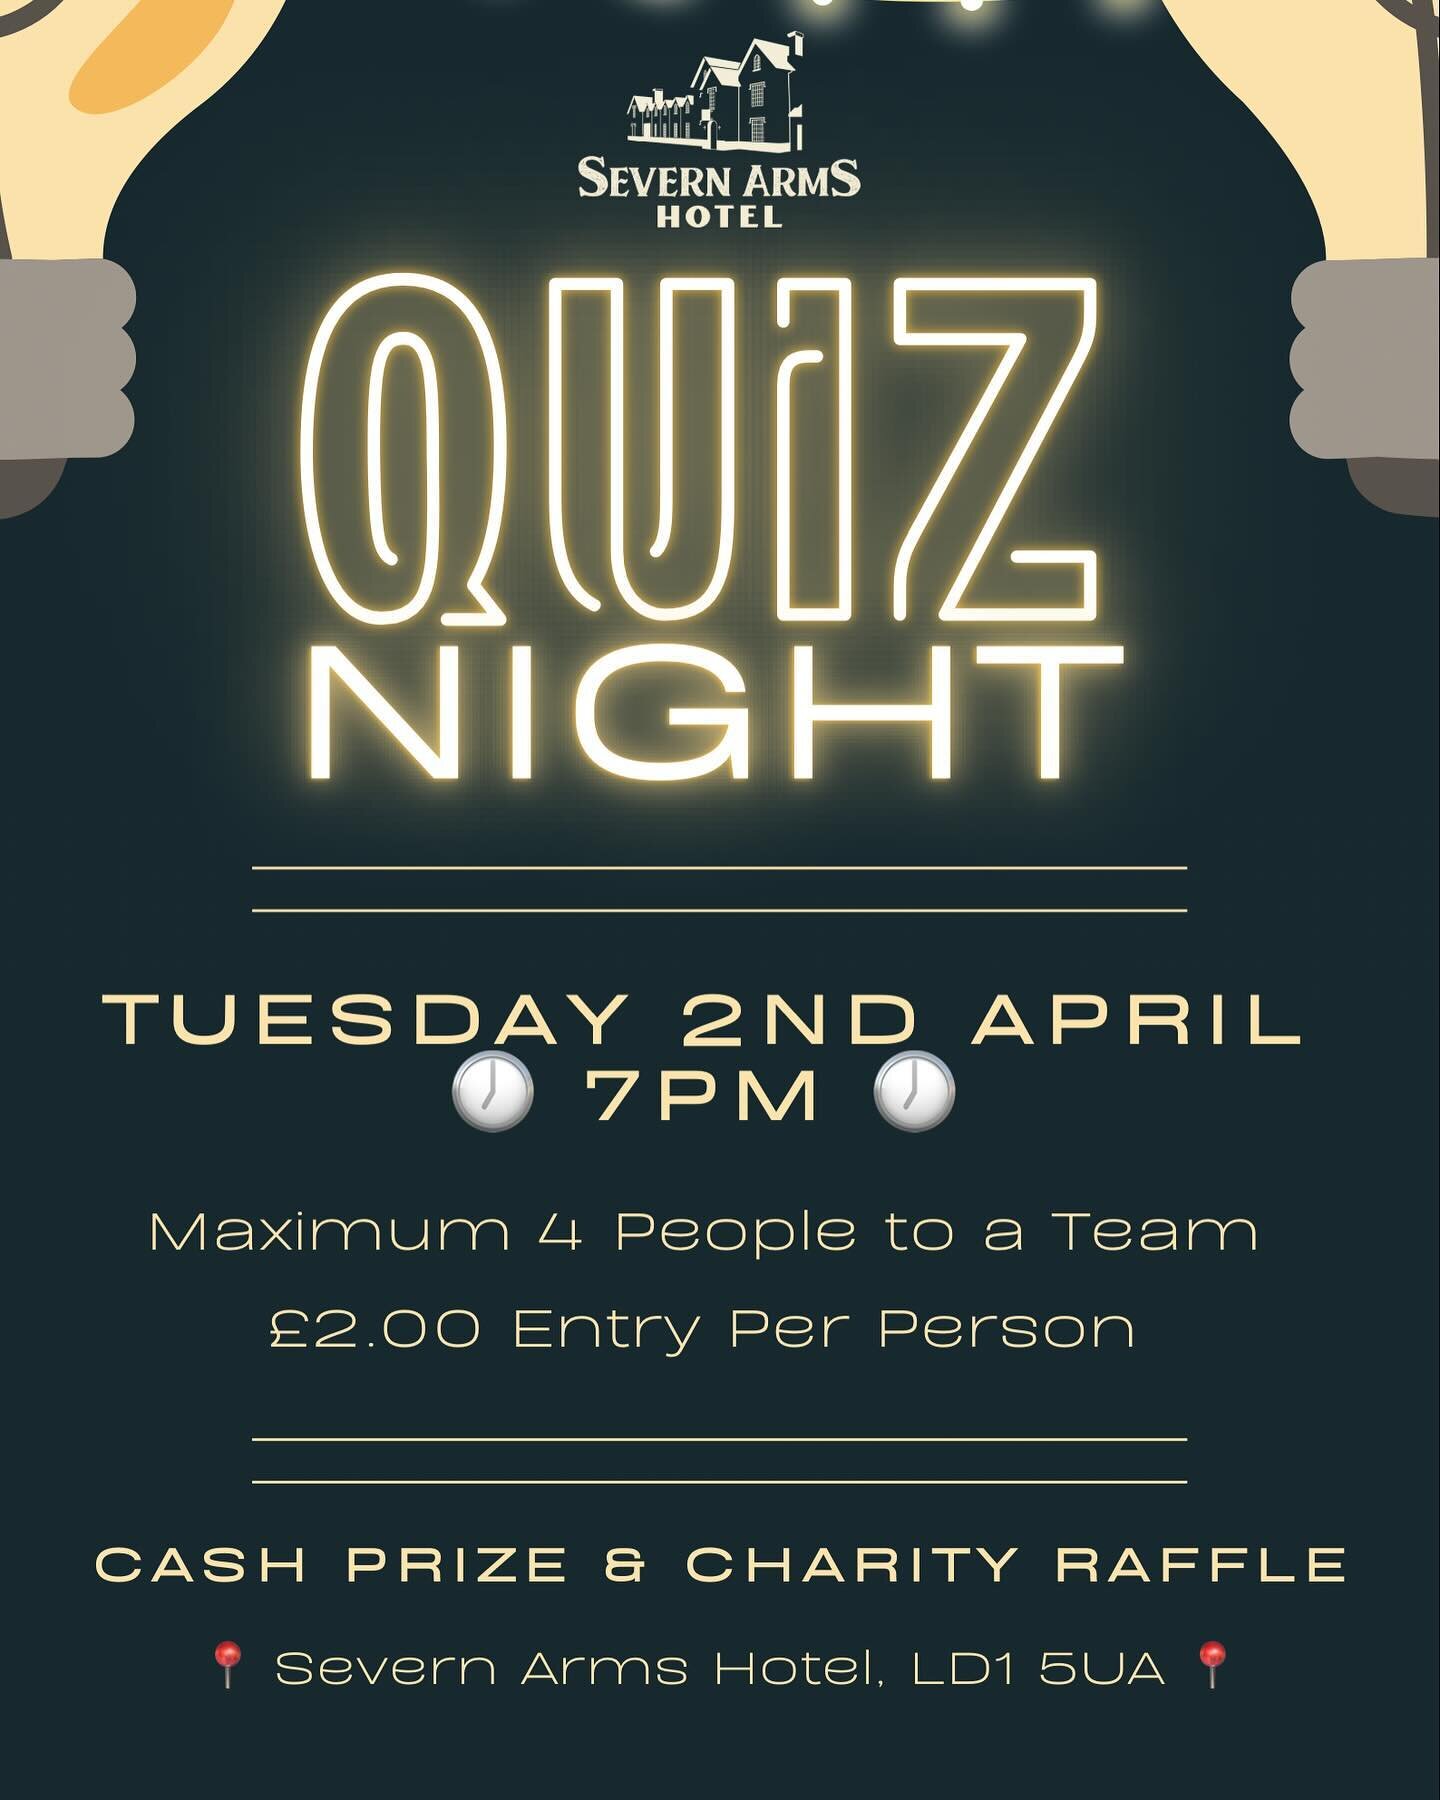 A big thank you to everyone who joined us for the March Quiz! With 19 Teams &amp; 60+ people - we managed to raise &pound;250 for the Cystic Fibrosis Trust! 💛

Our next Quiz is on Tuesday 2nd April - and this time we shall be raising money for the M